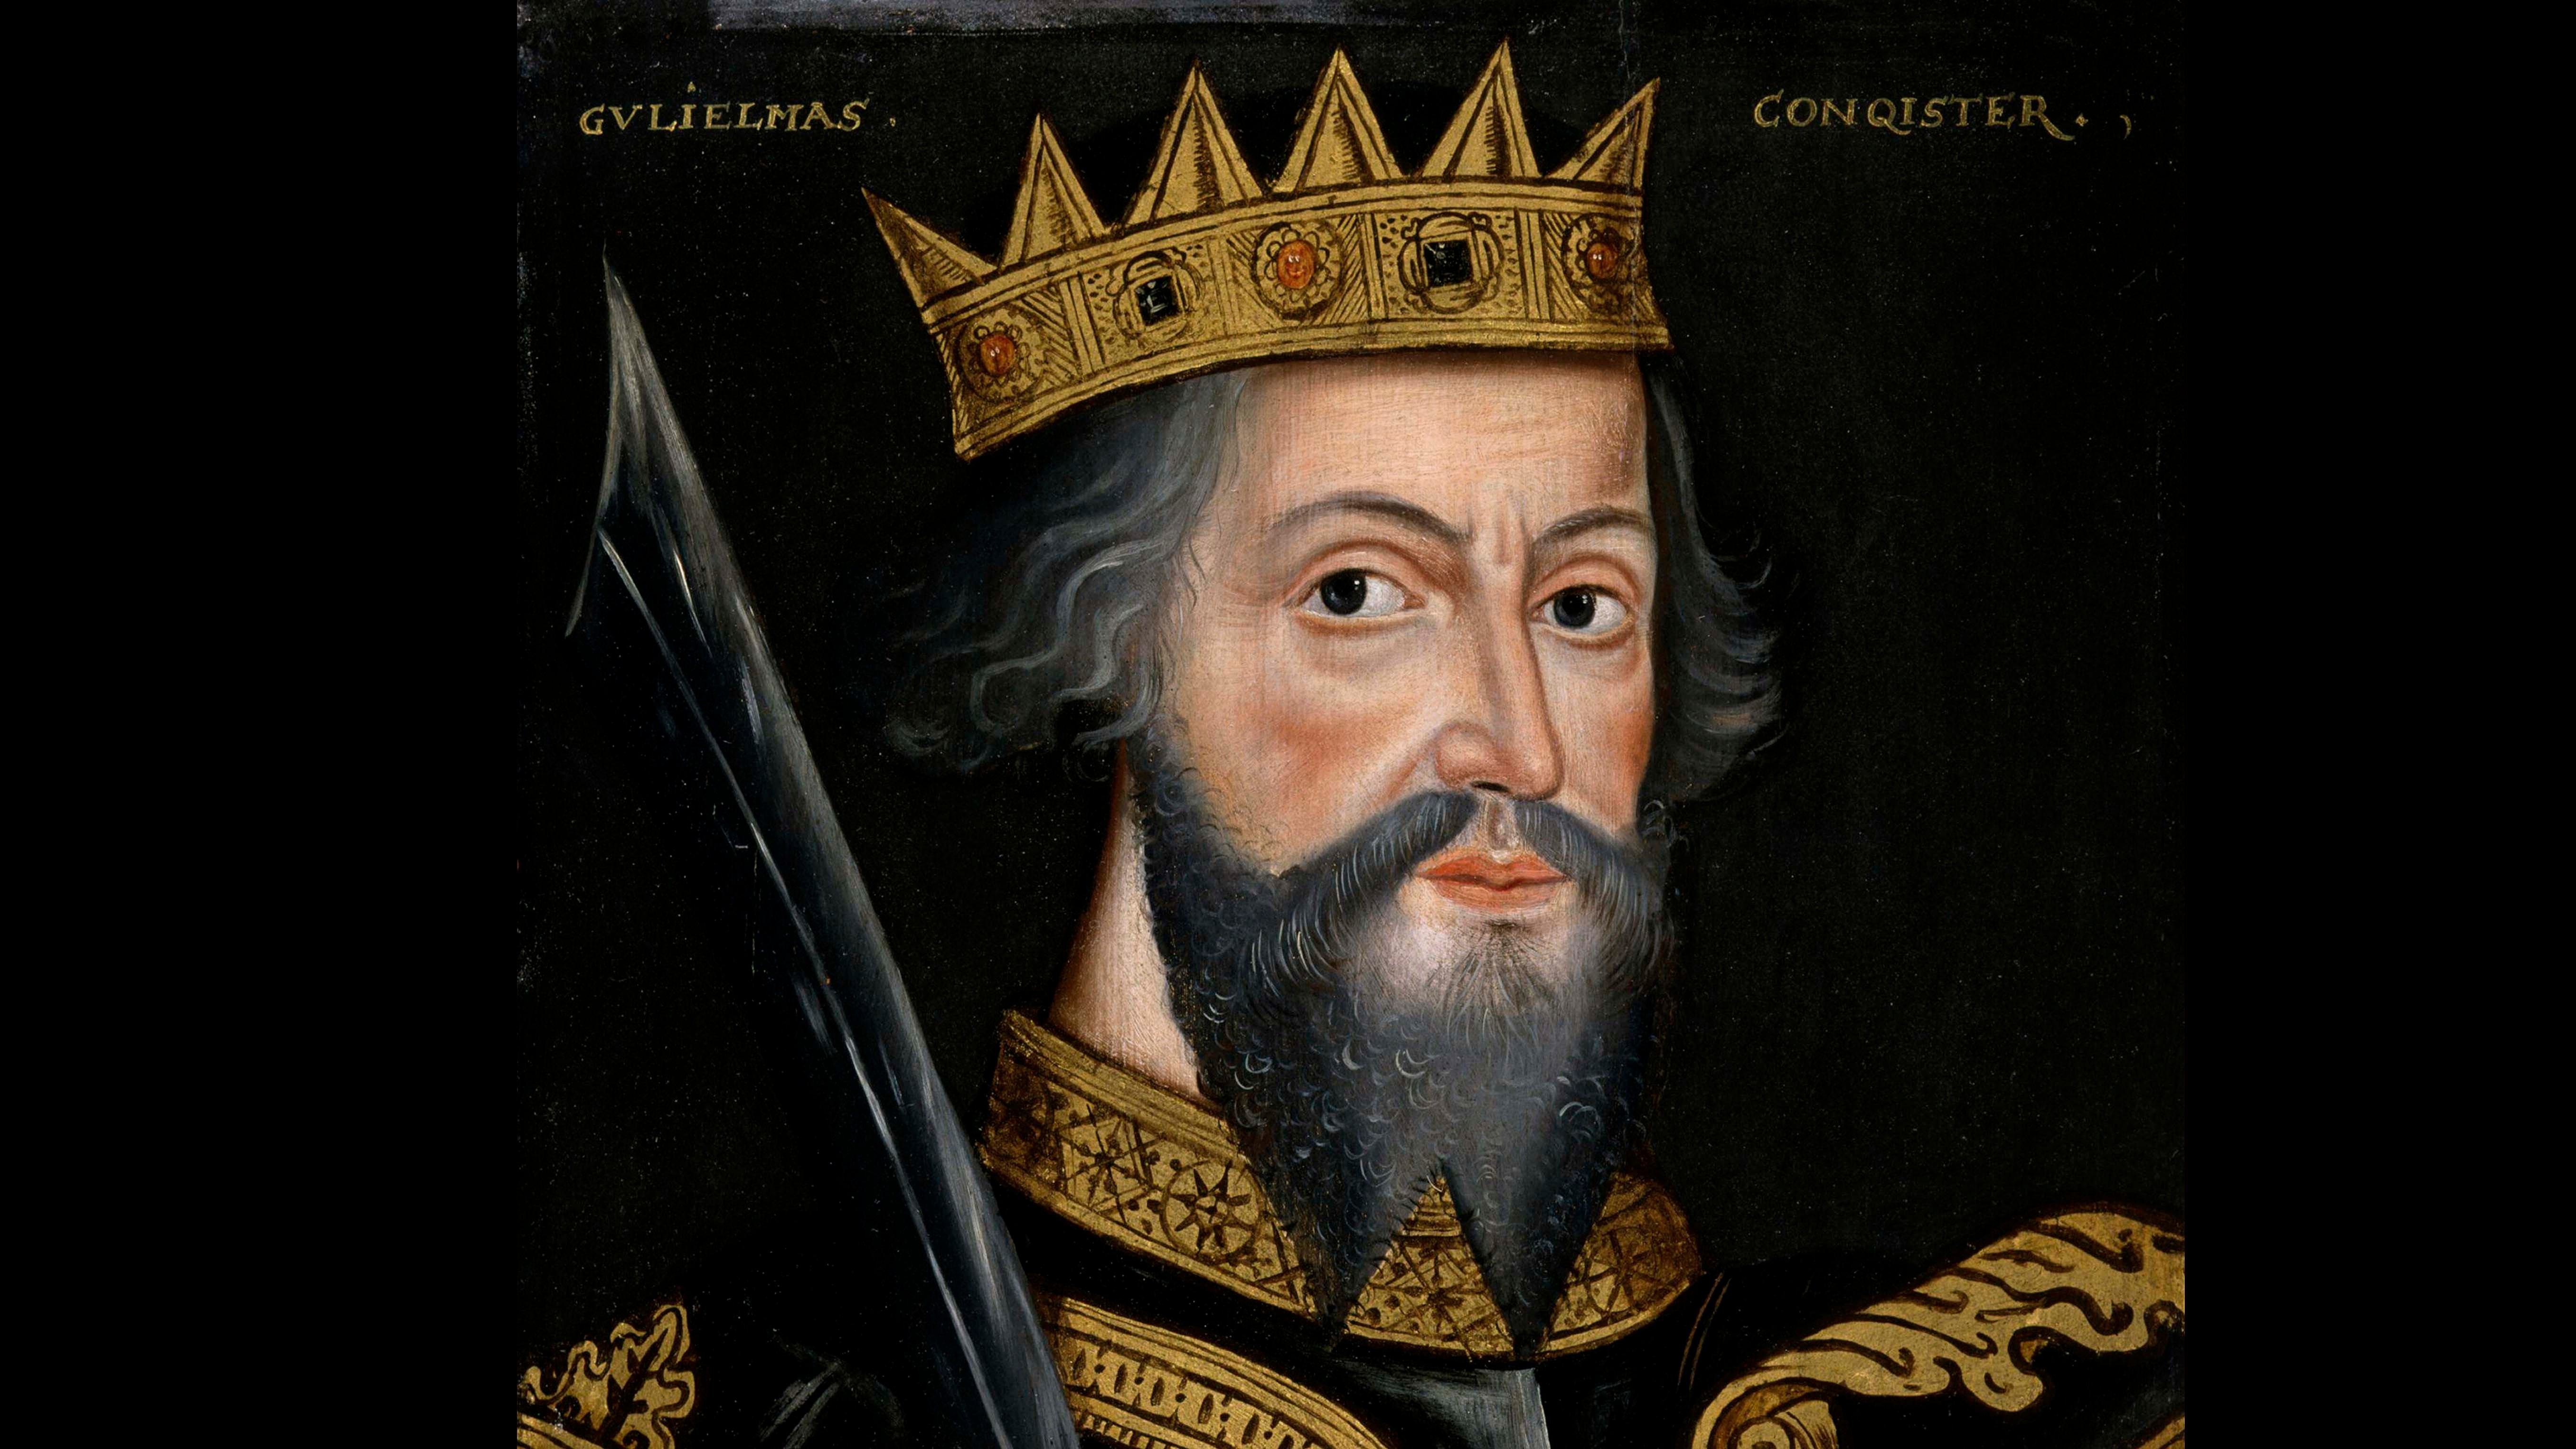 William the Conqueror was the second king of England to be crowned in 1066